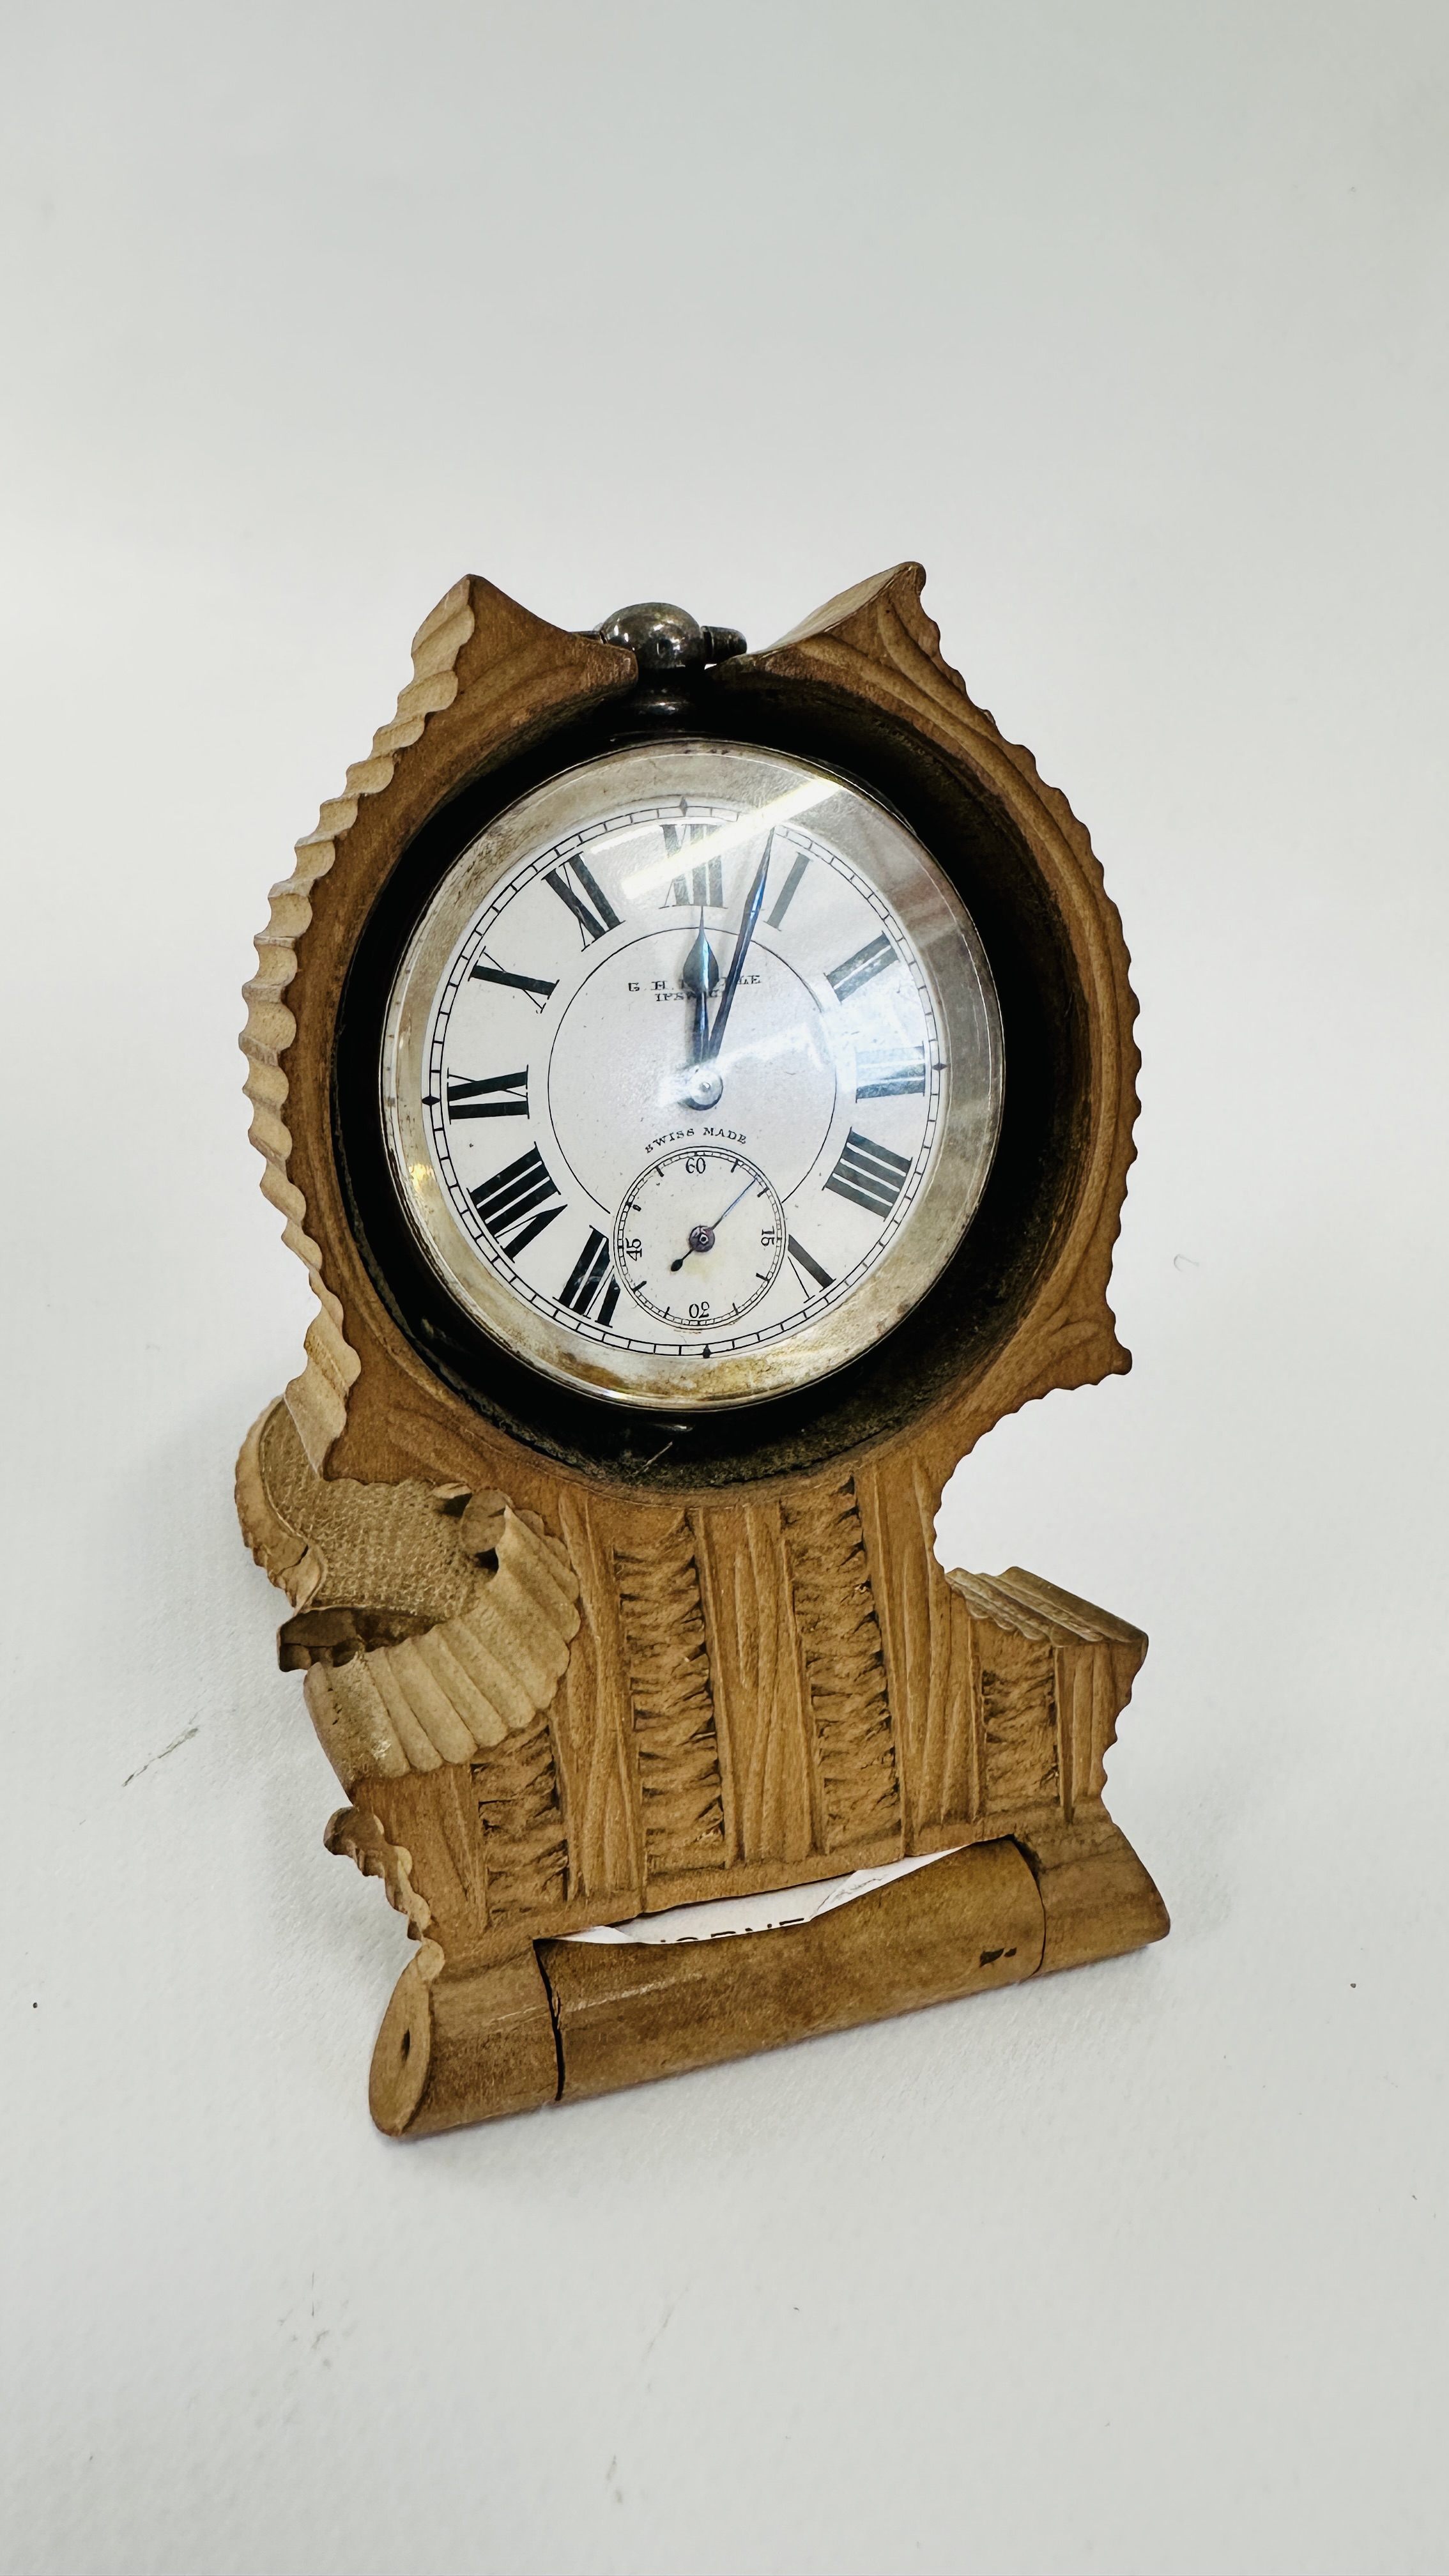 ANTIQUE G. H DIPPLE IPSWICH POCKET WATCH IN ANTIQUE CARVED WOOD BED STAND.